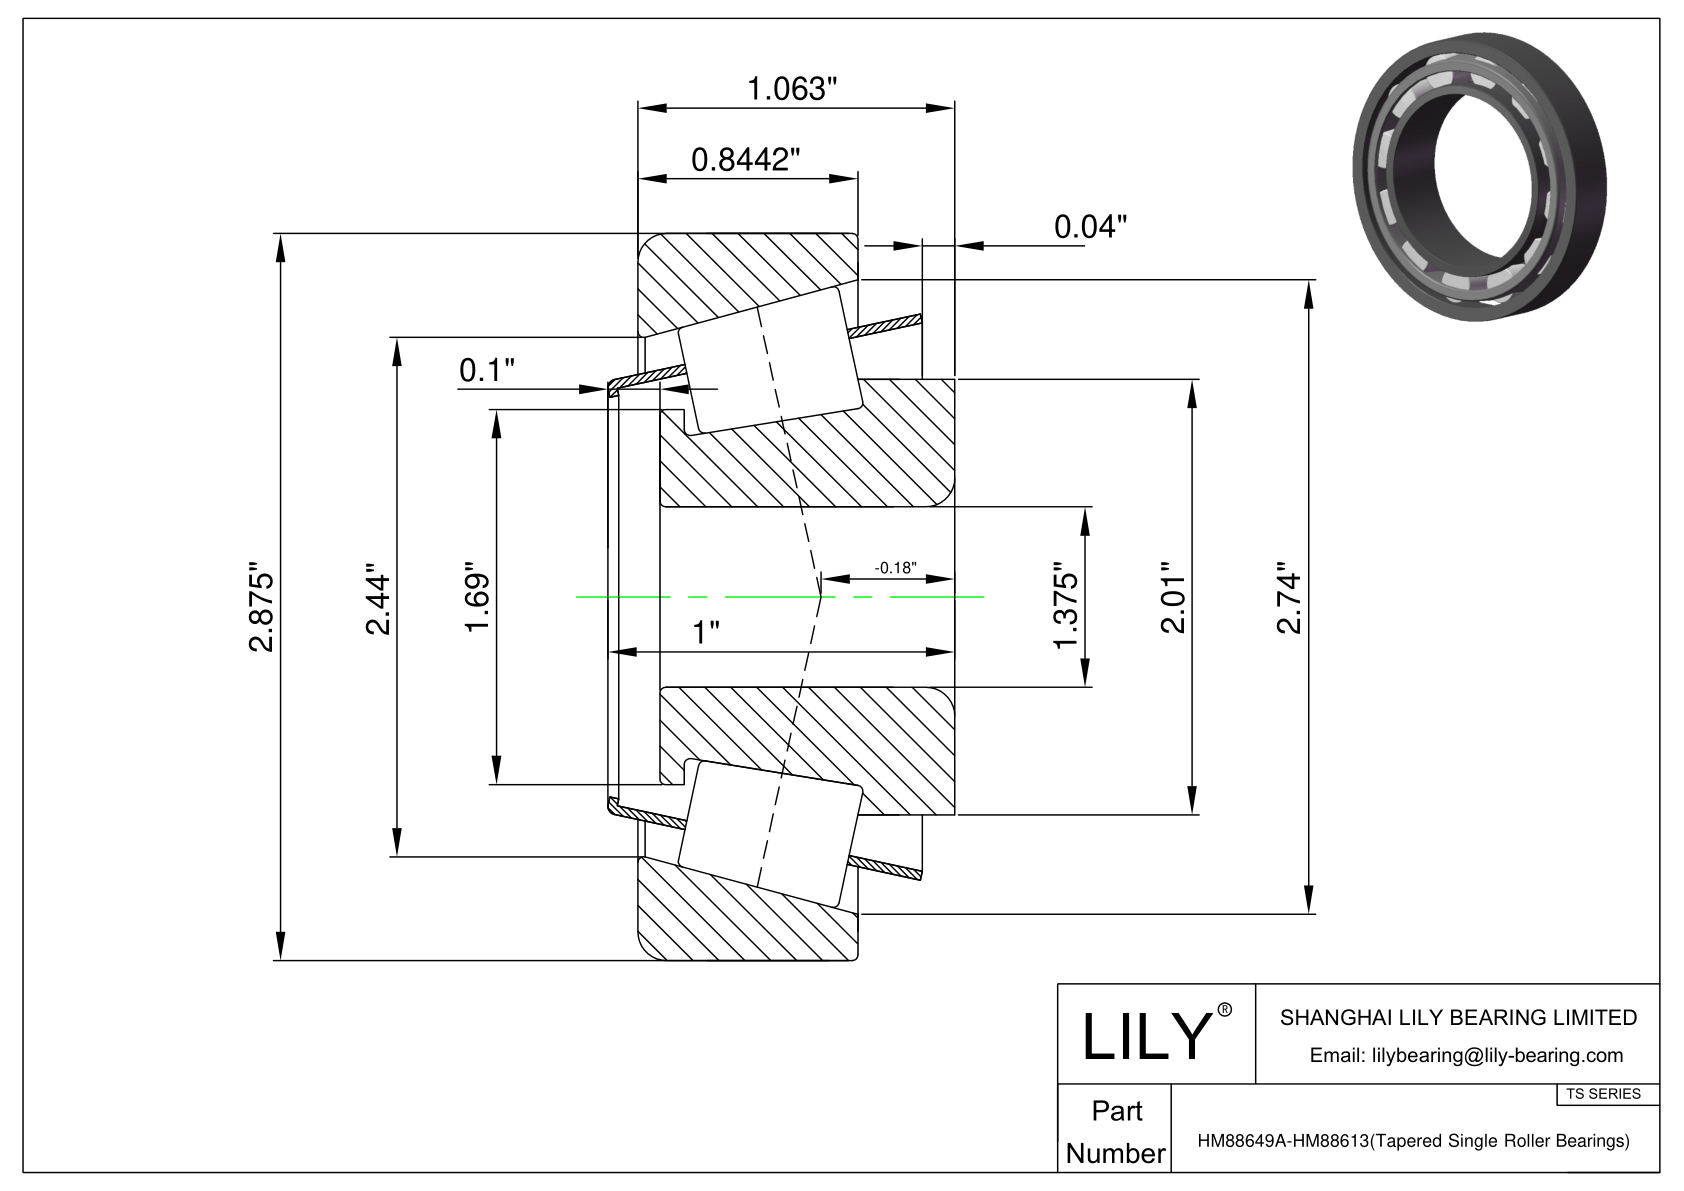 HM88649A-HM88613 TS (Tapered Single Roller Bearings) (Imperial) cad drawing